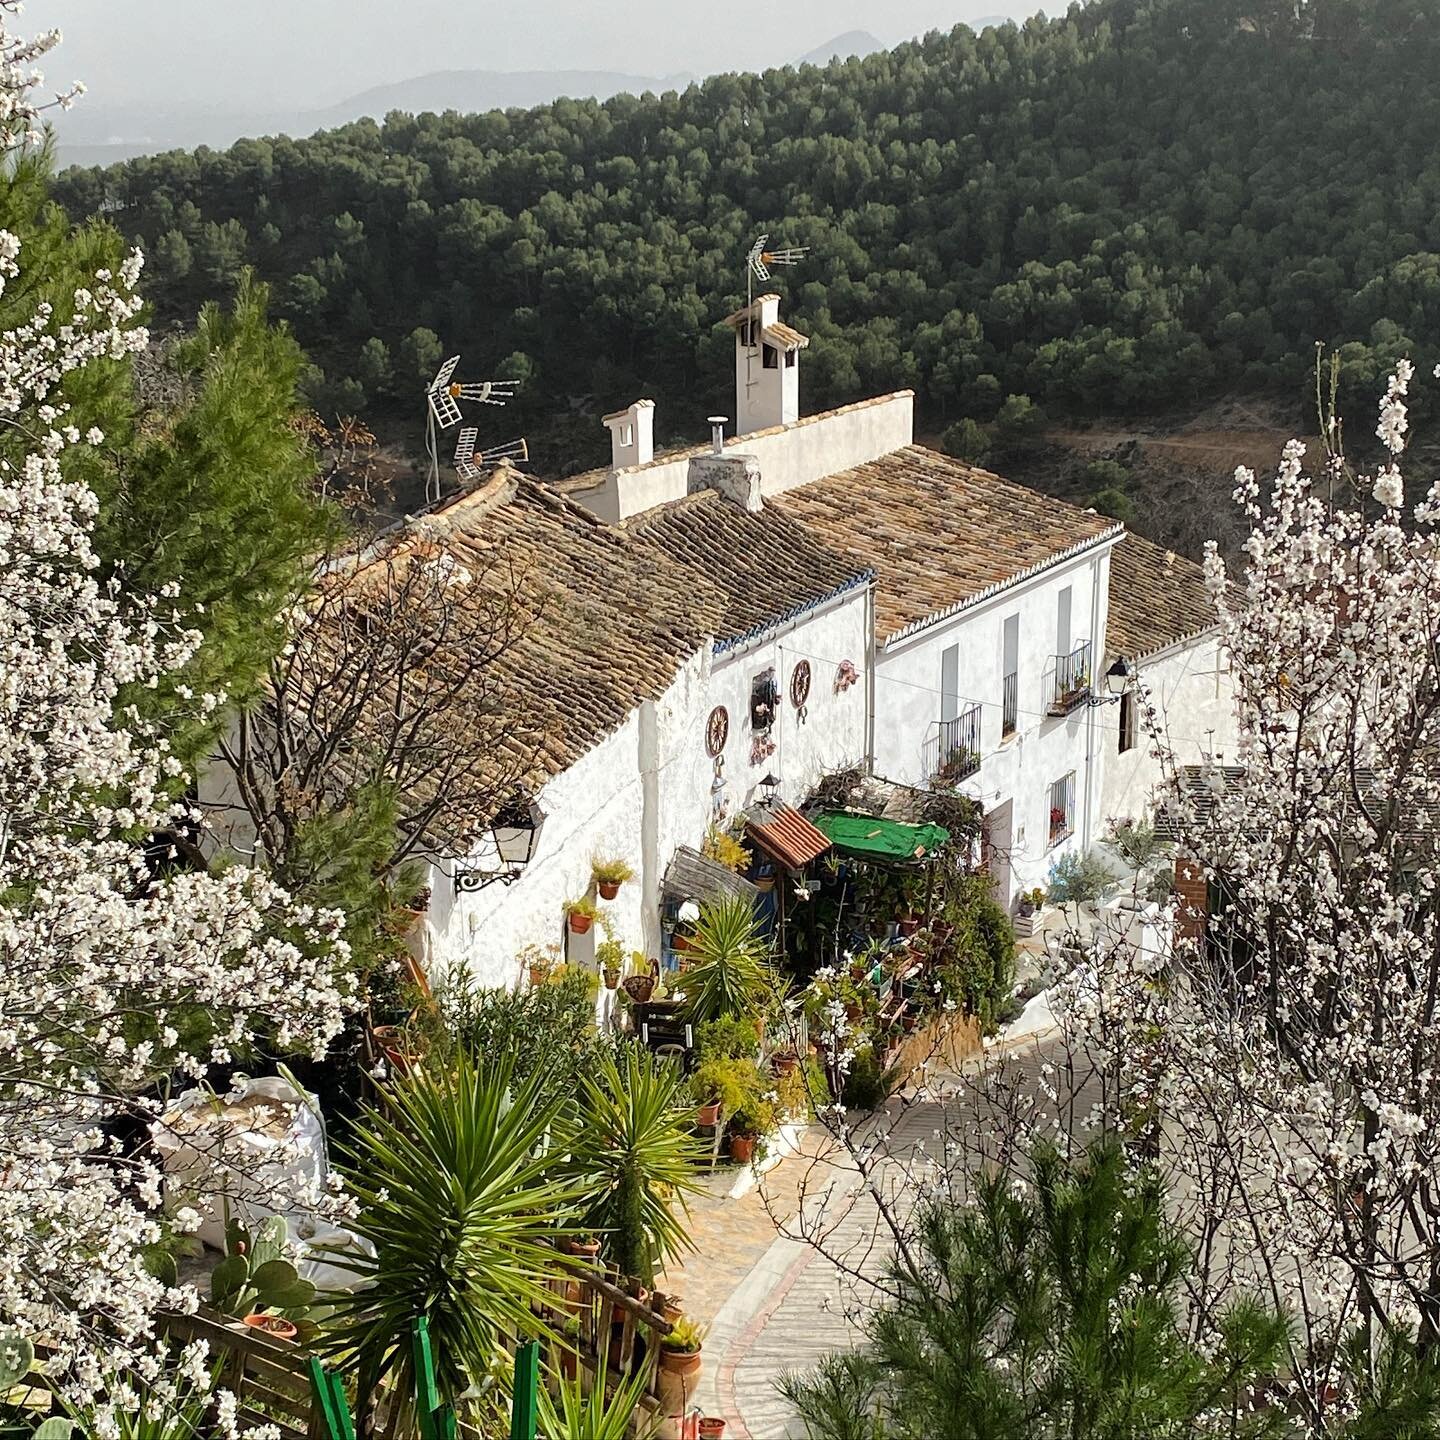 Casa Higueras looking gorgeous with the spring almond blossom. 
We have extended our closure until February 14th in line with government guidelines but we are using this time wisely, most notably in the garden where we are creating a new patio area a